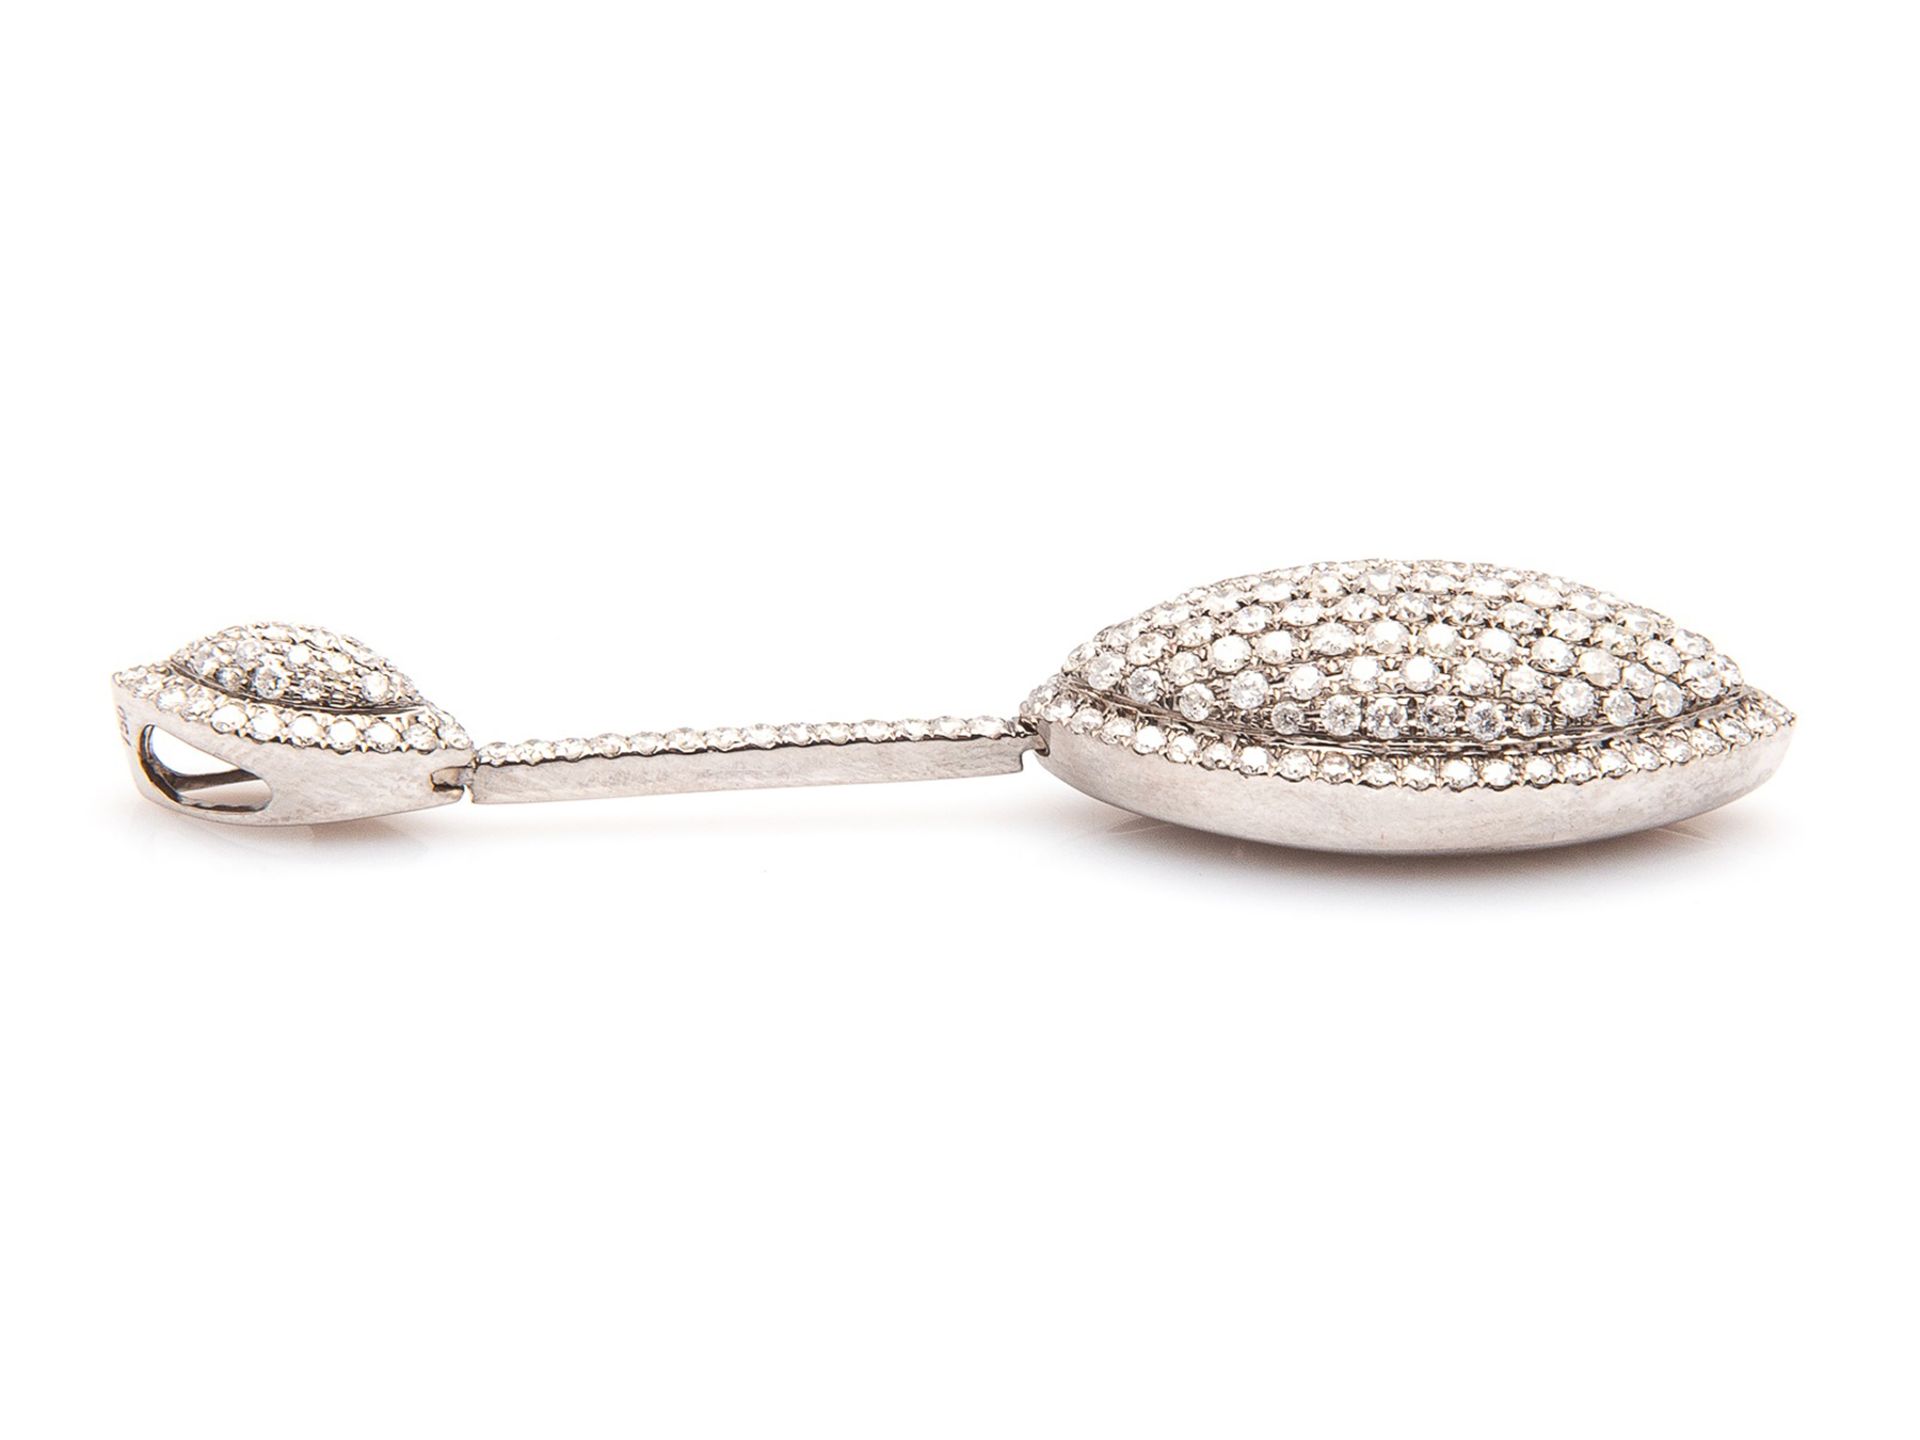 Distinguished pendant for Lady in 18k white gold with 3 ct of brilliant cut diamonds in total - Image 7 of 9